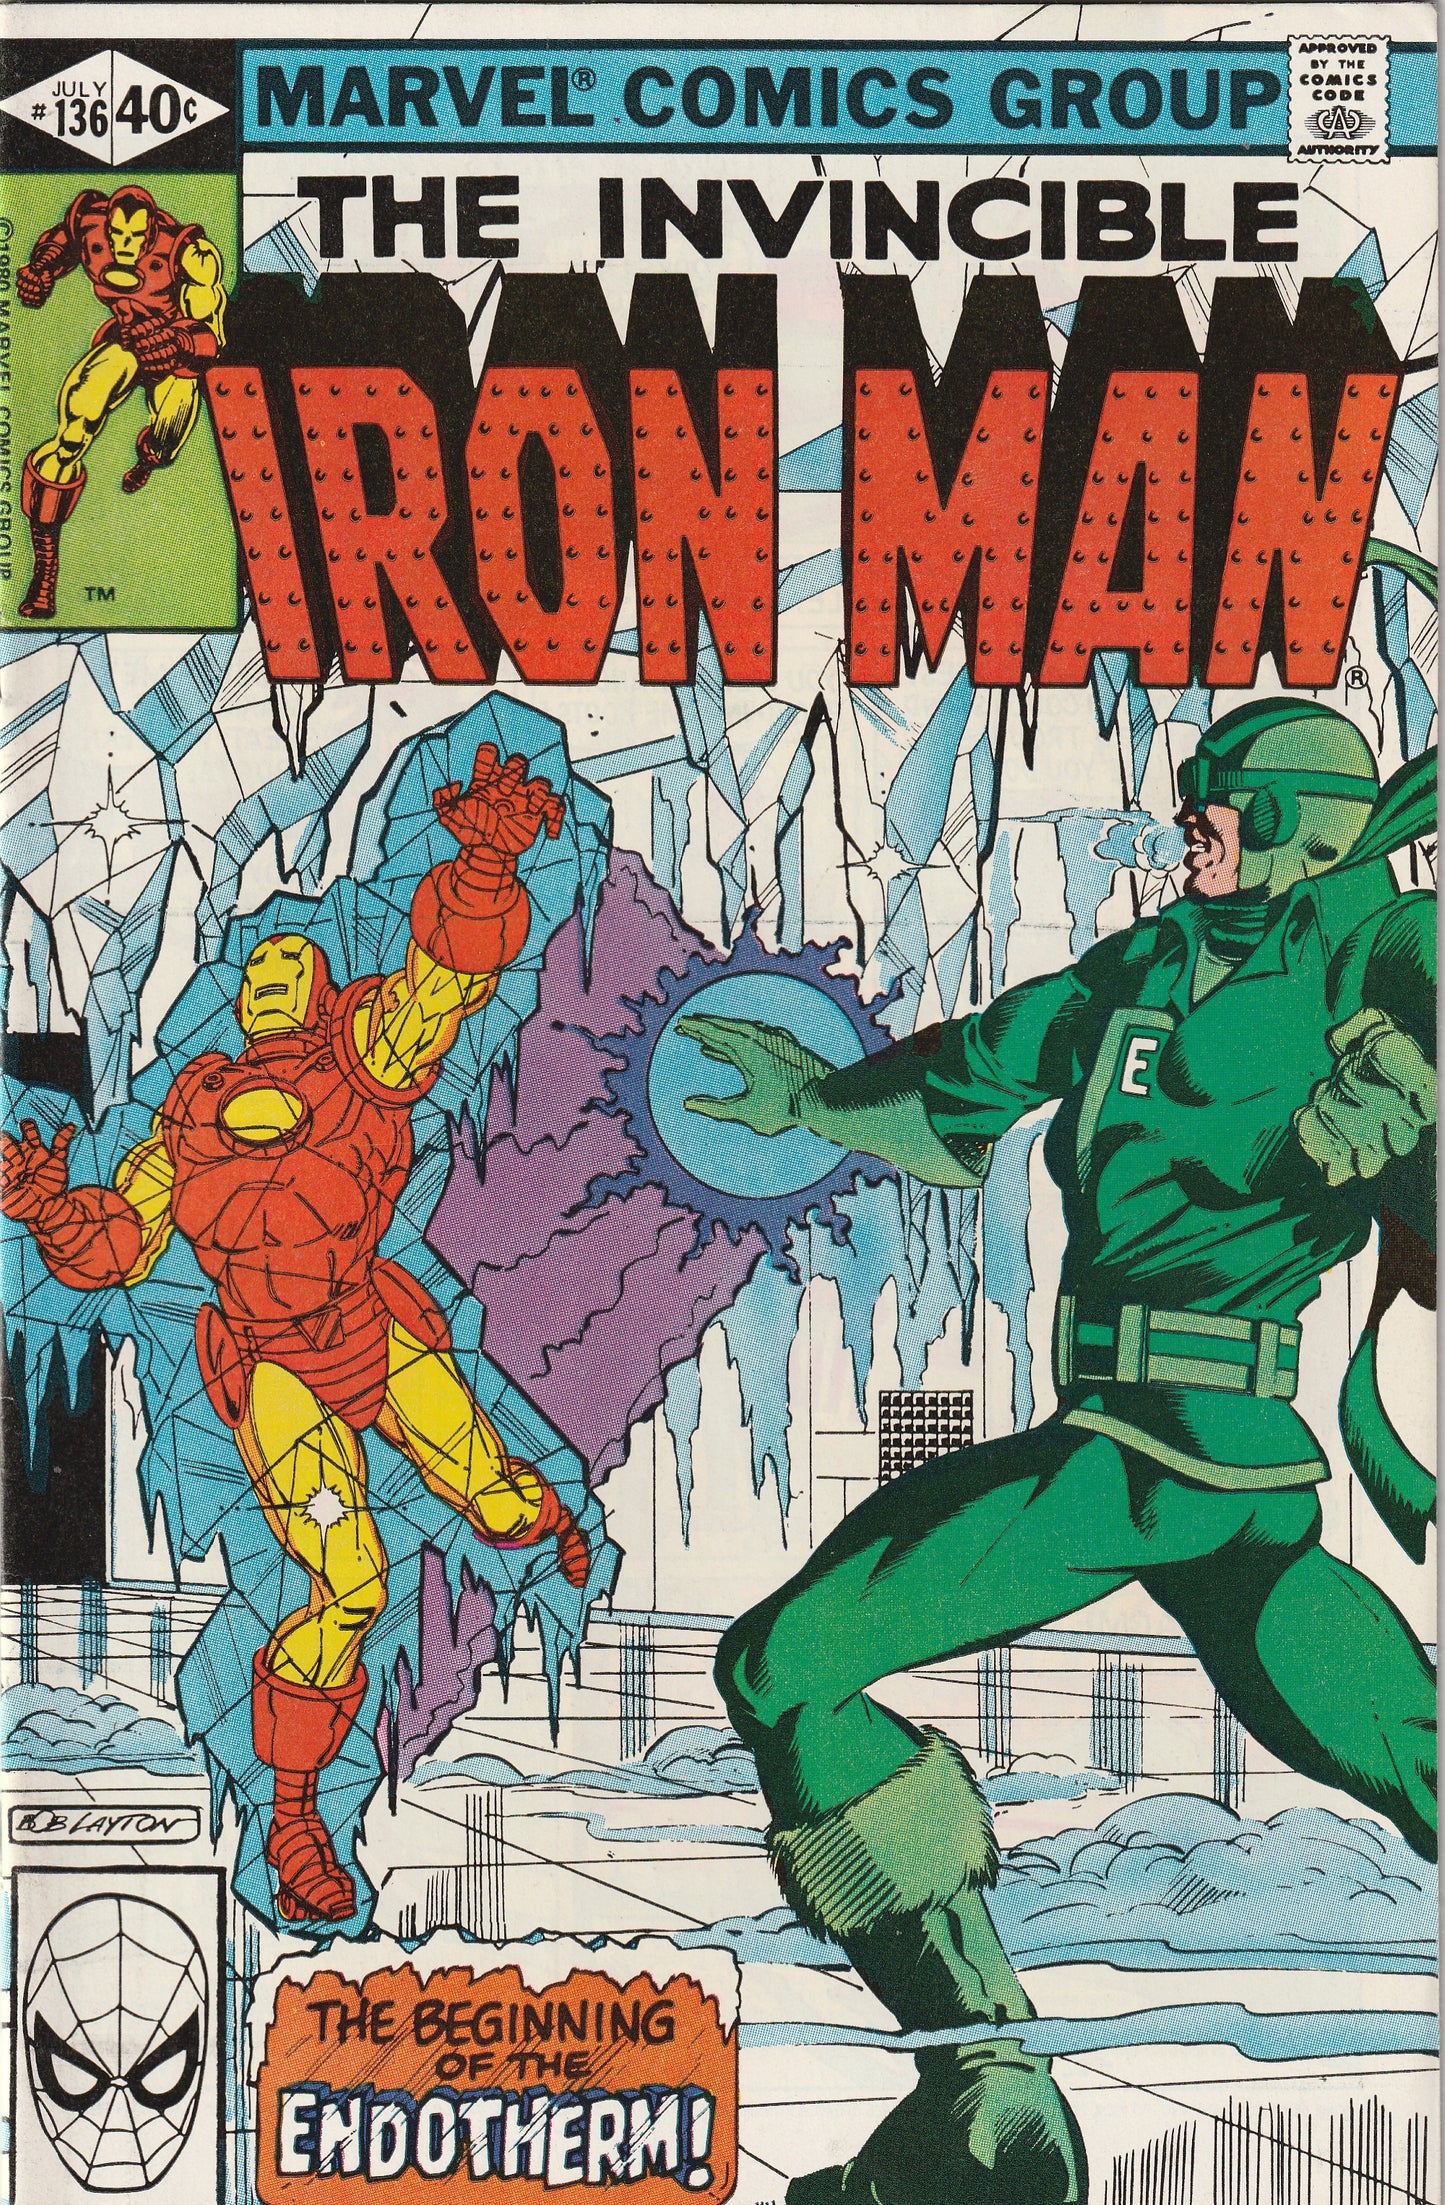 Iron Man #136 (1980) - 1st Appearance of Endotherm (Thomas Wilkins)